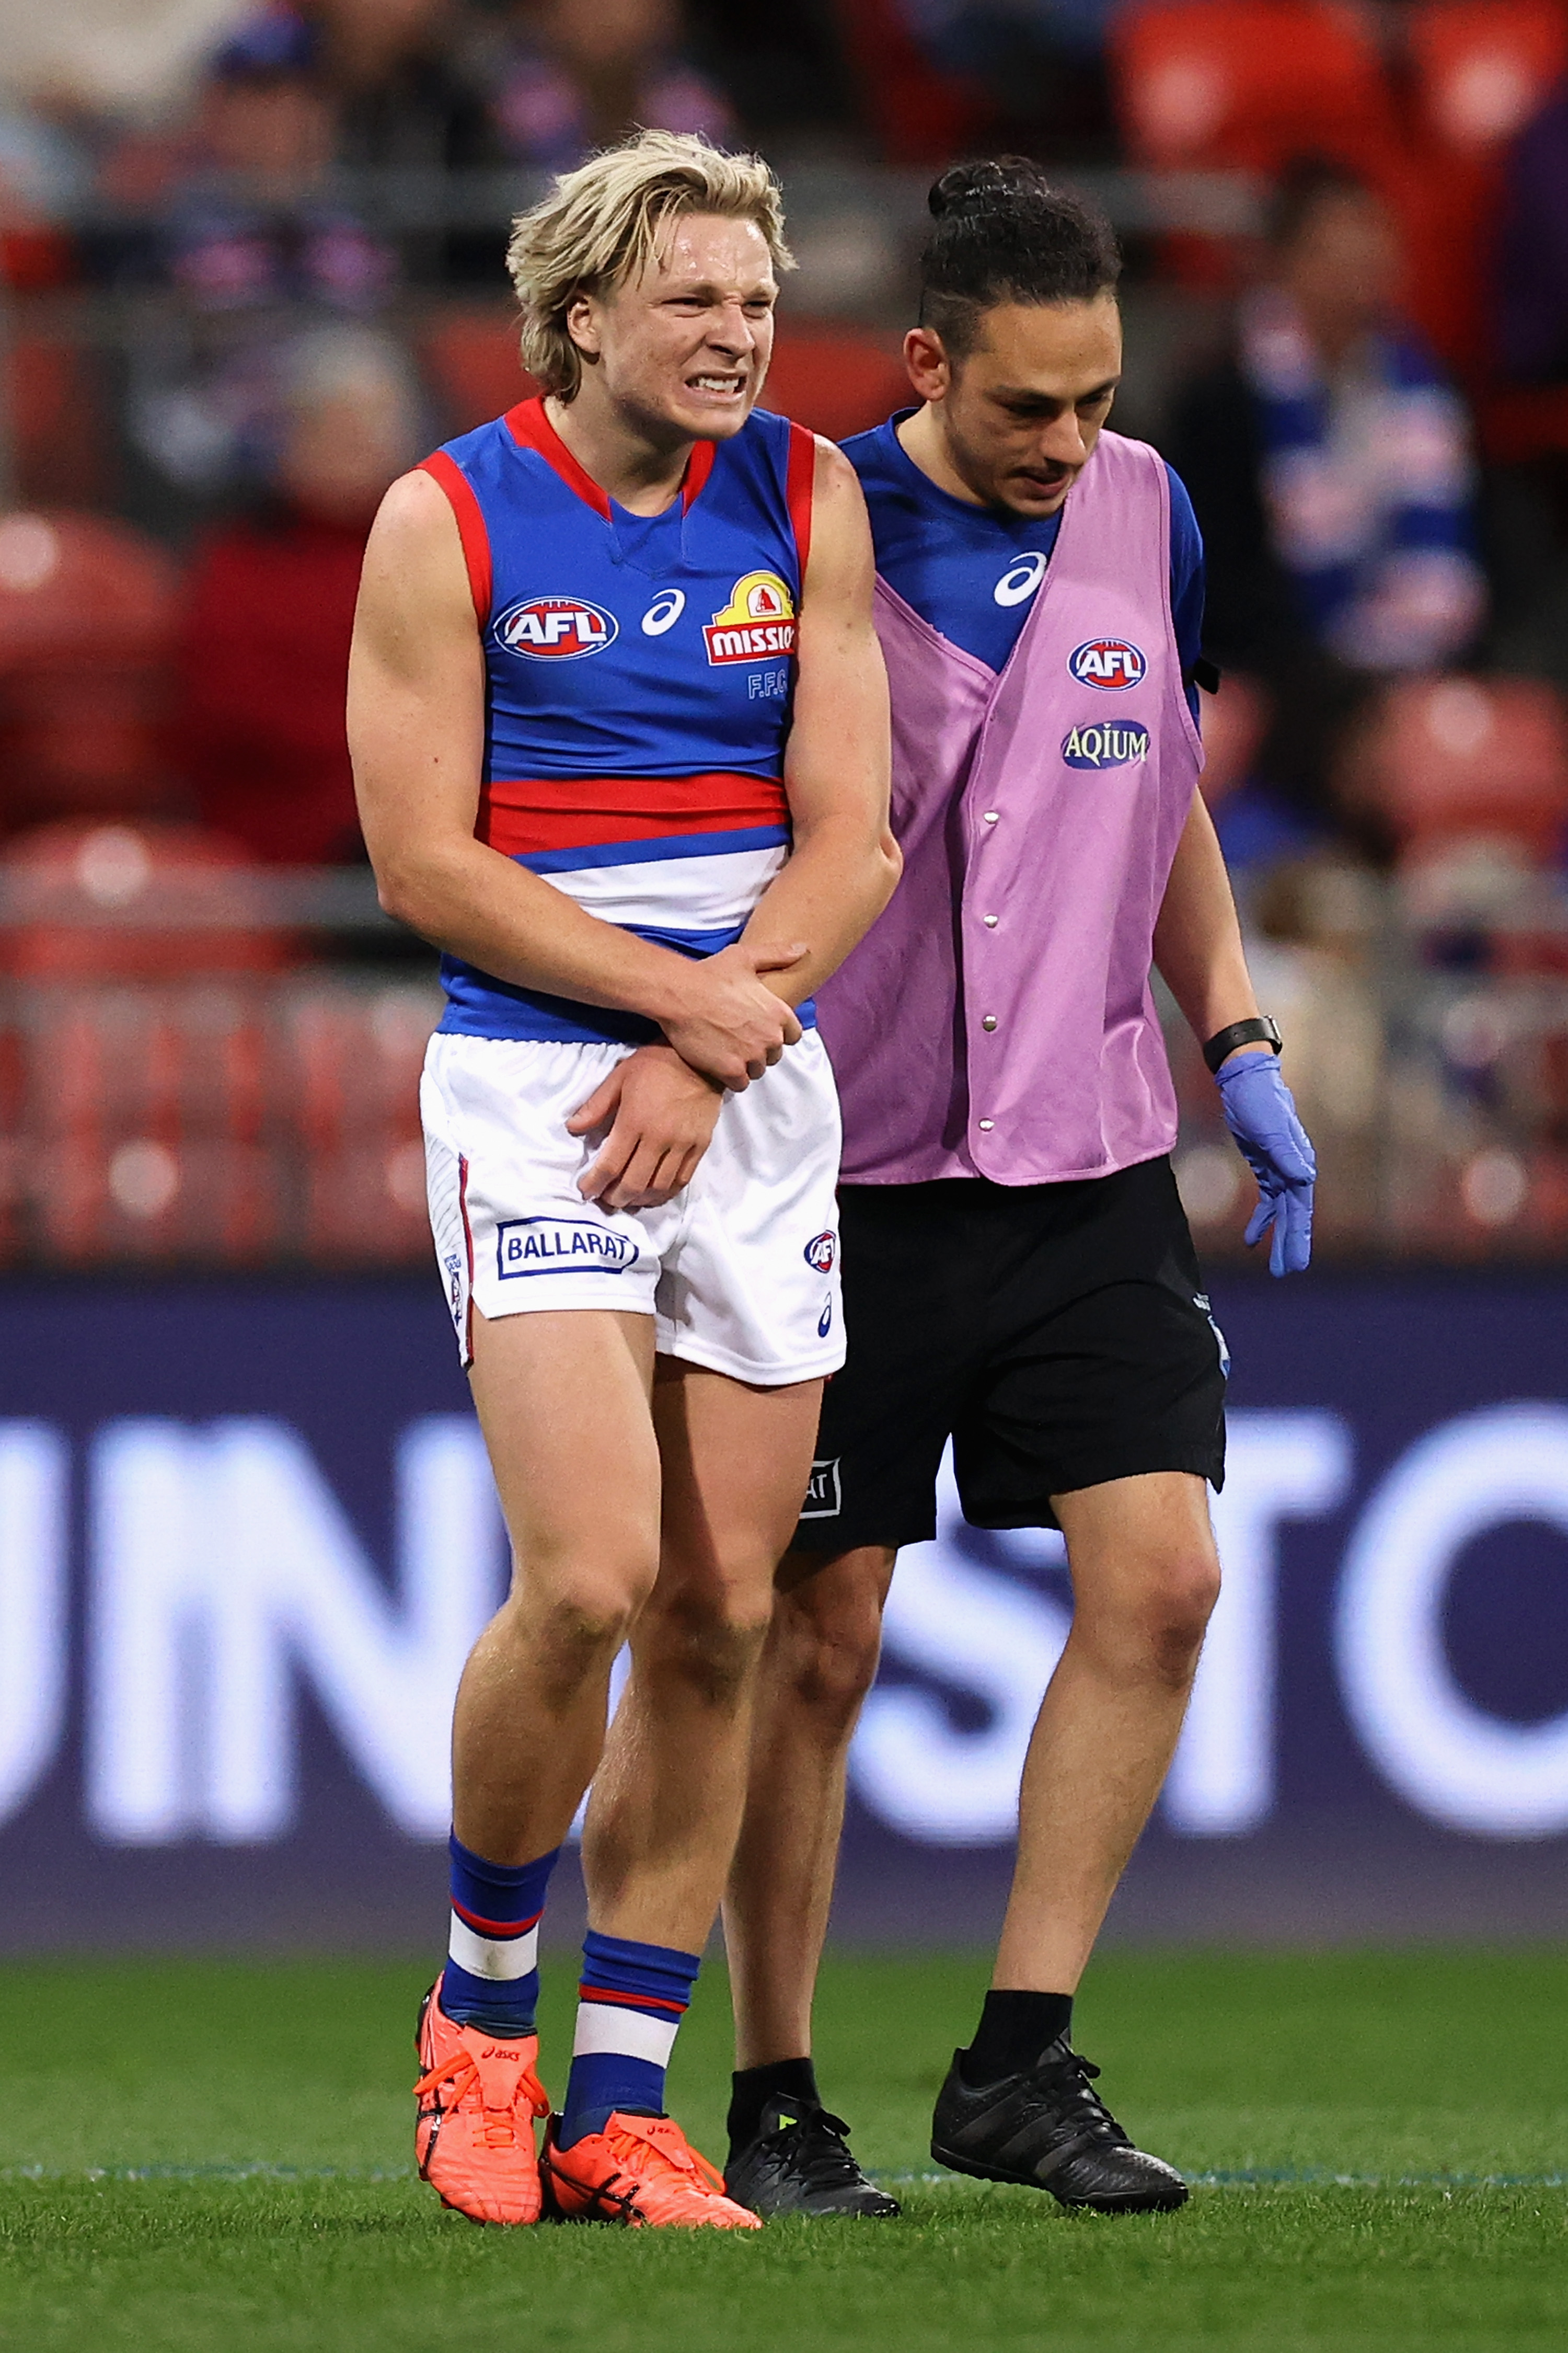 Cody Weightman of the Bulldogs leaves the field with a dislocated elbow duing the round 14 AFL match between the GWS Giants and the Western Bulldogs. Photo: Cameron Spencer